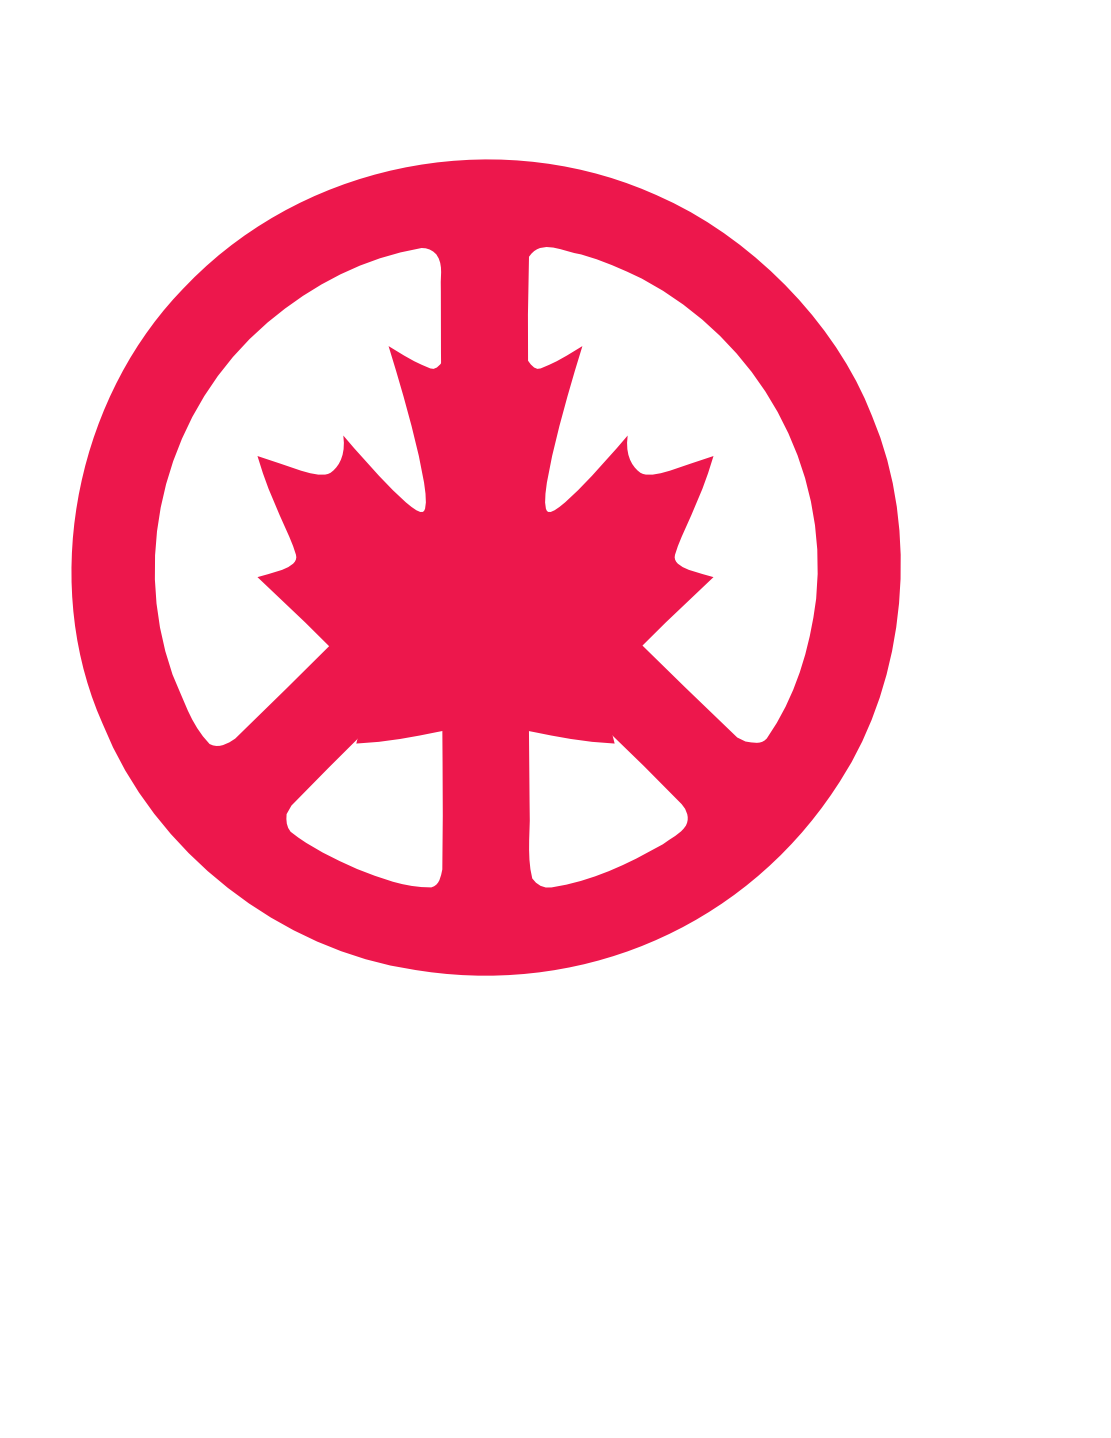 Canadian Clipart